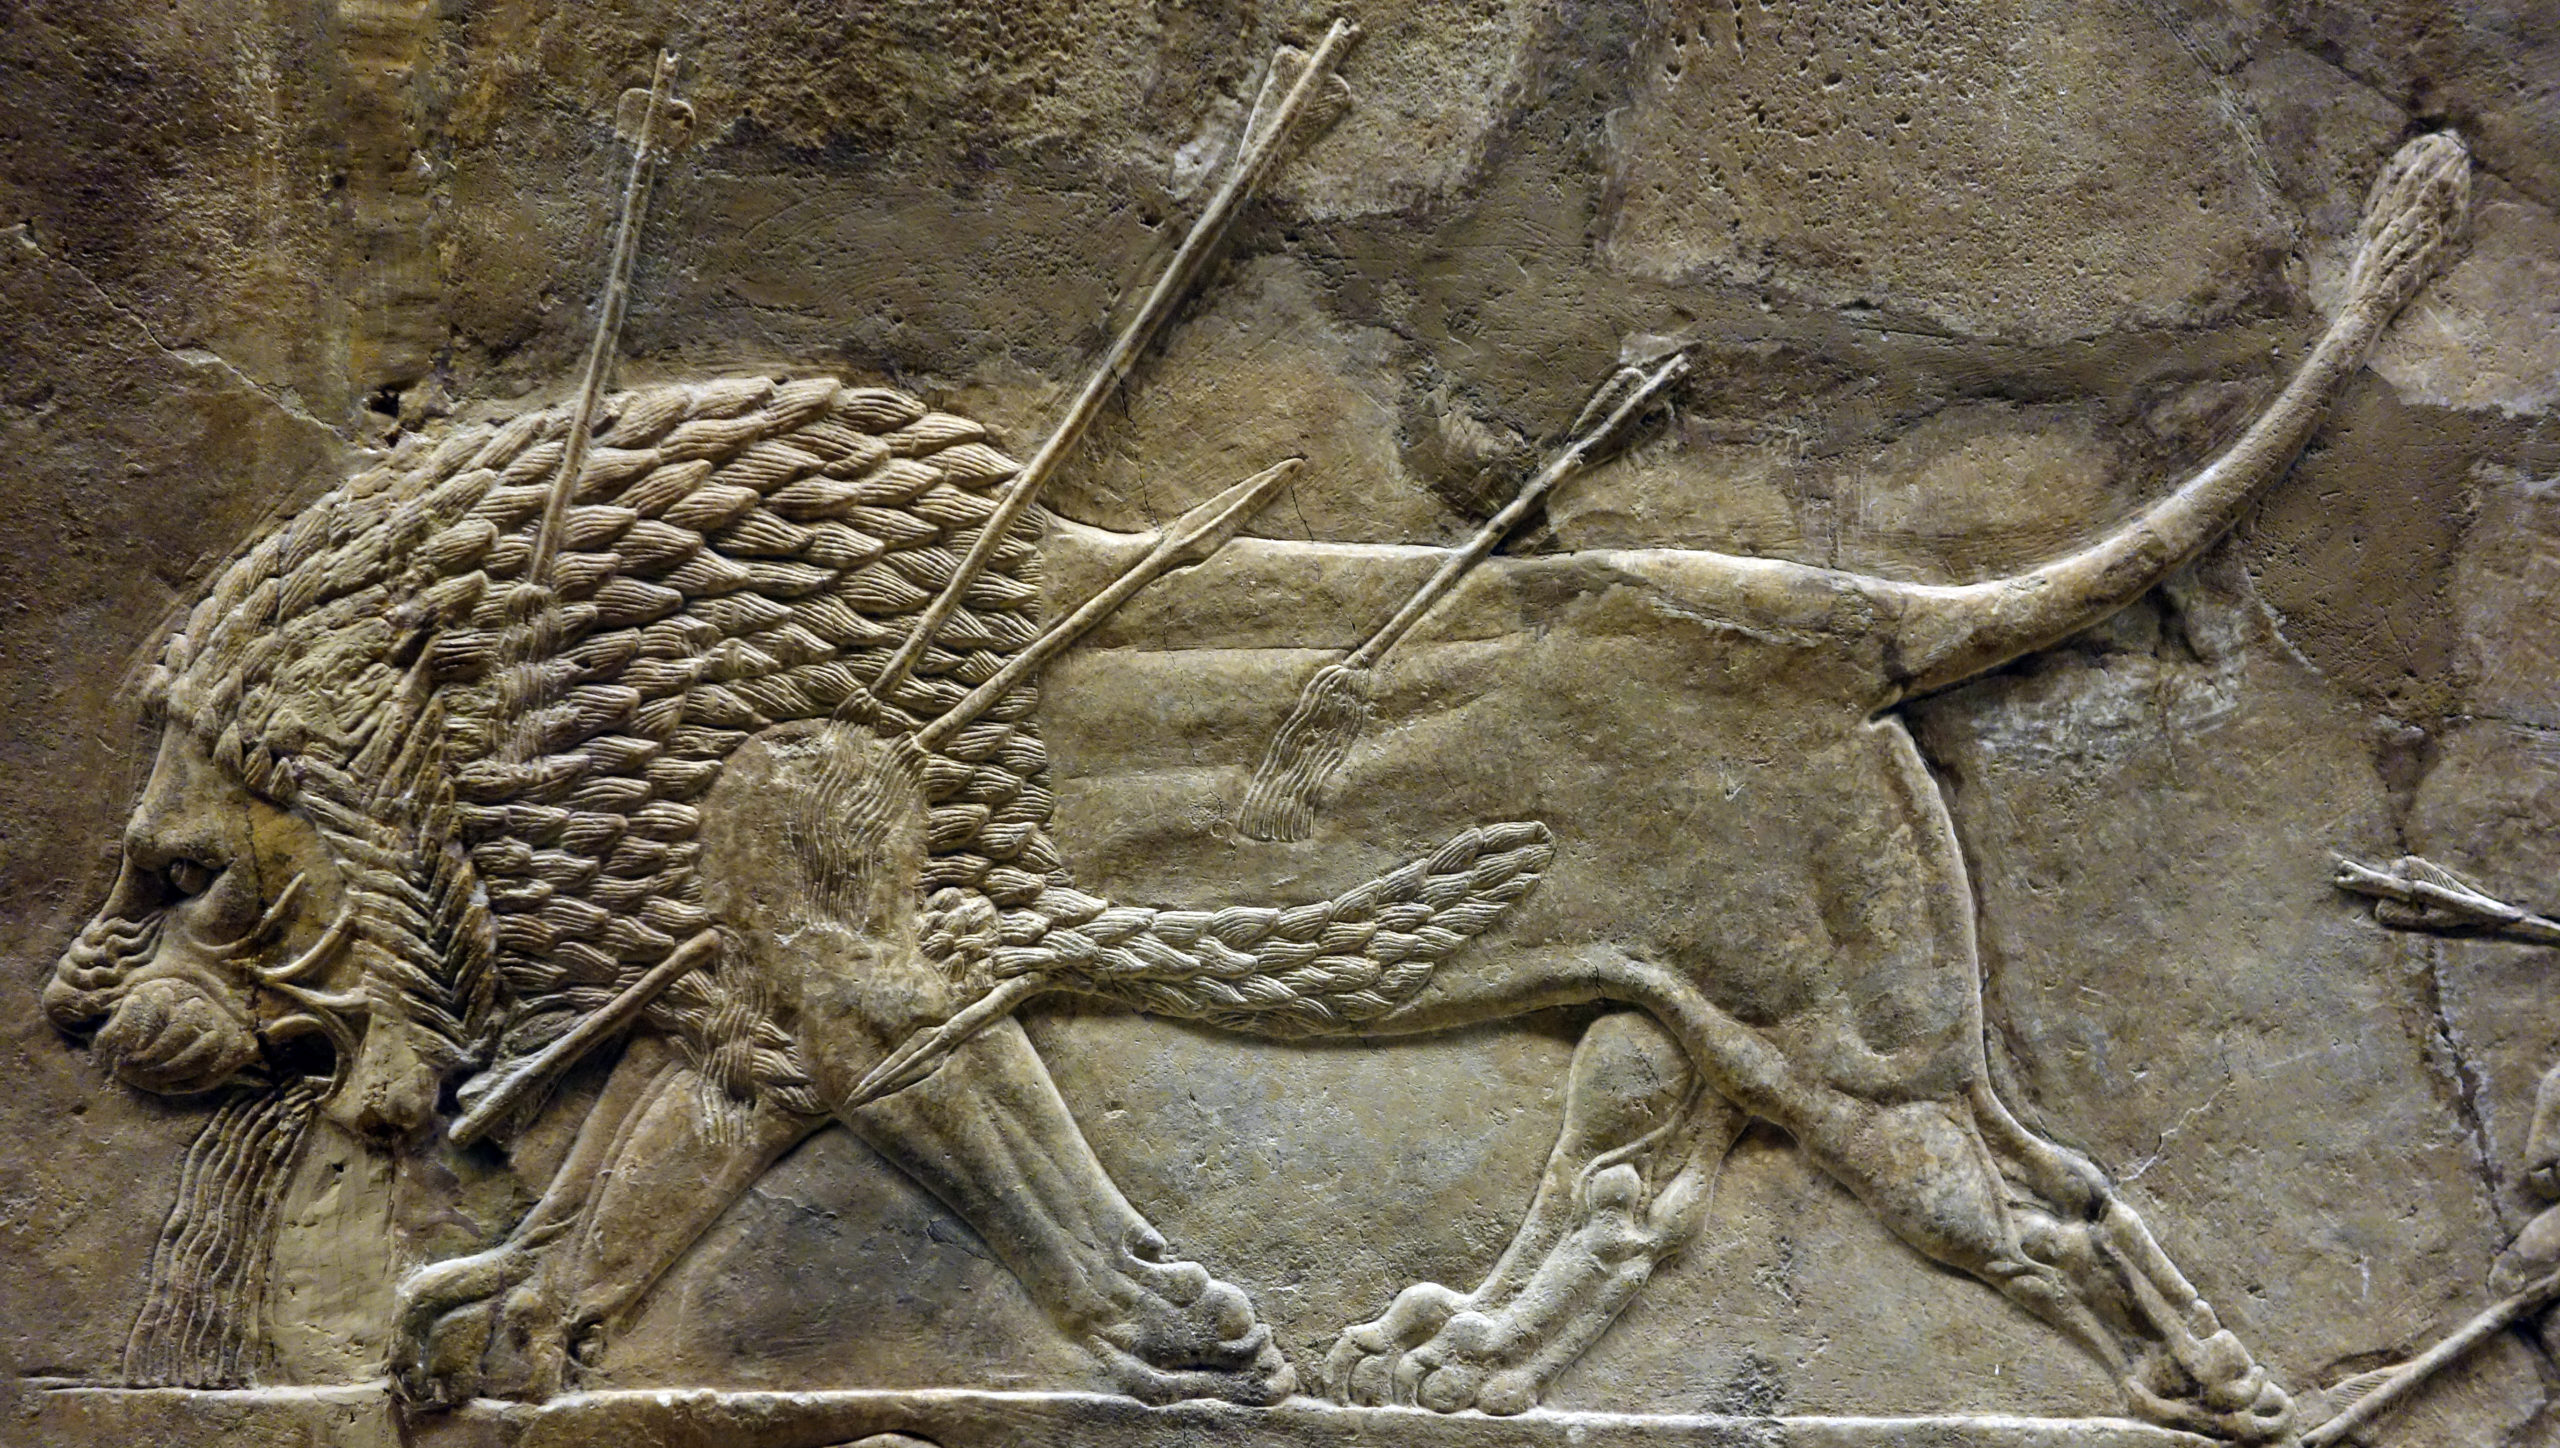 The Dying Lion, panel from the North Palace of Ashurbanipal, c. 645 B.C.E., Neo-Assyrian, alabaster, 16.5 x 30 cm, Nineveh, northern Iraq © Trustees of the British Museum. Part of a series of wall panels that showed a royal hunt. Struck by one of the king's arrows, blood gushes from the lion's mouth. There was a very long tradition of royal lion hunts in Mesopotamia, with similar scenes known from the late fourth millennium B.C.E.